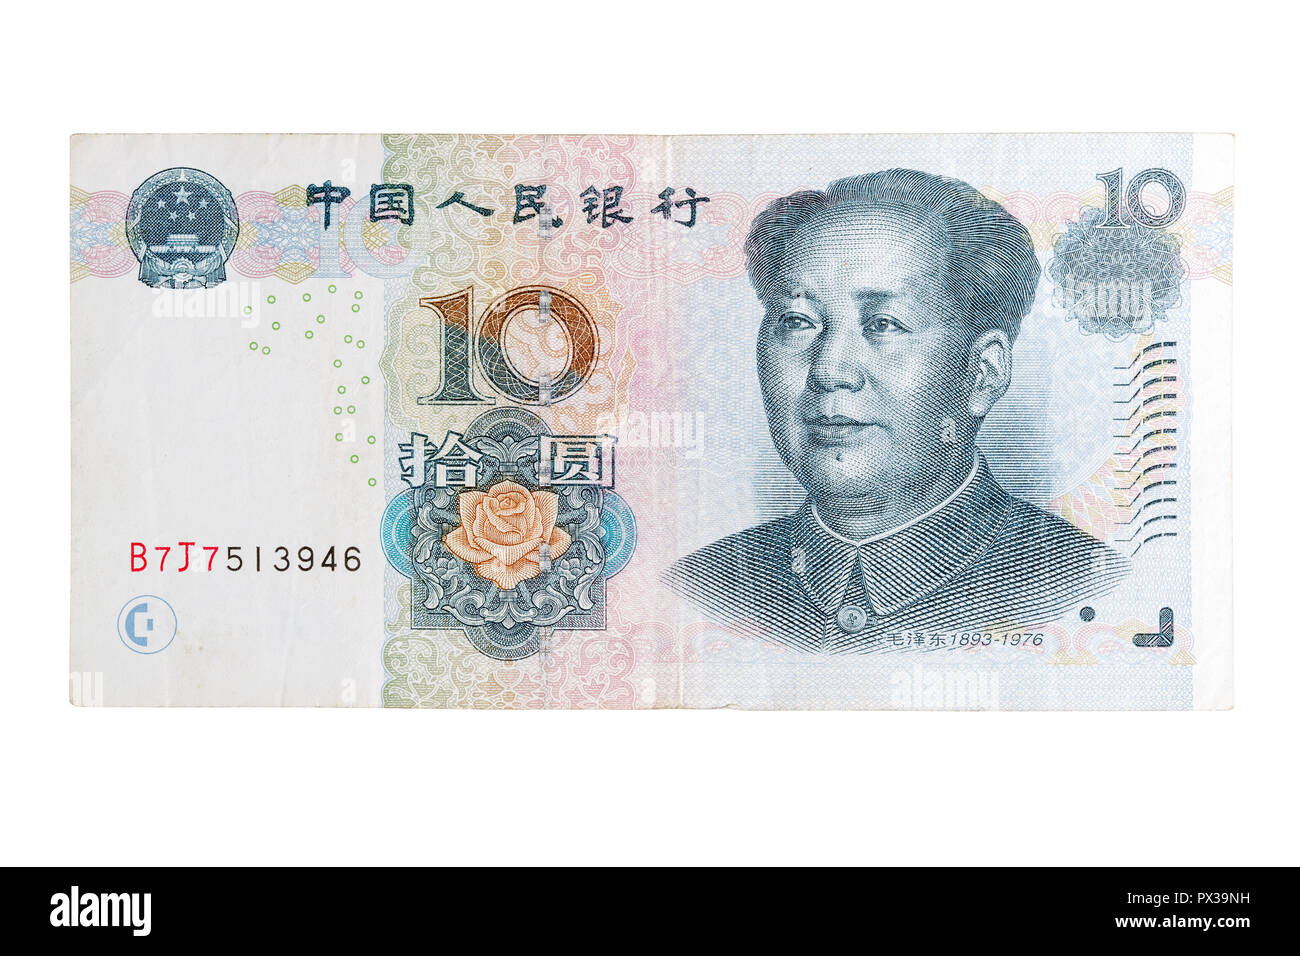 Old ten yuan banknote. Chinese currency with Mao portrait. Chenes money. Stock Photo